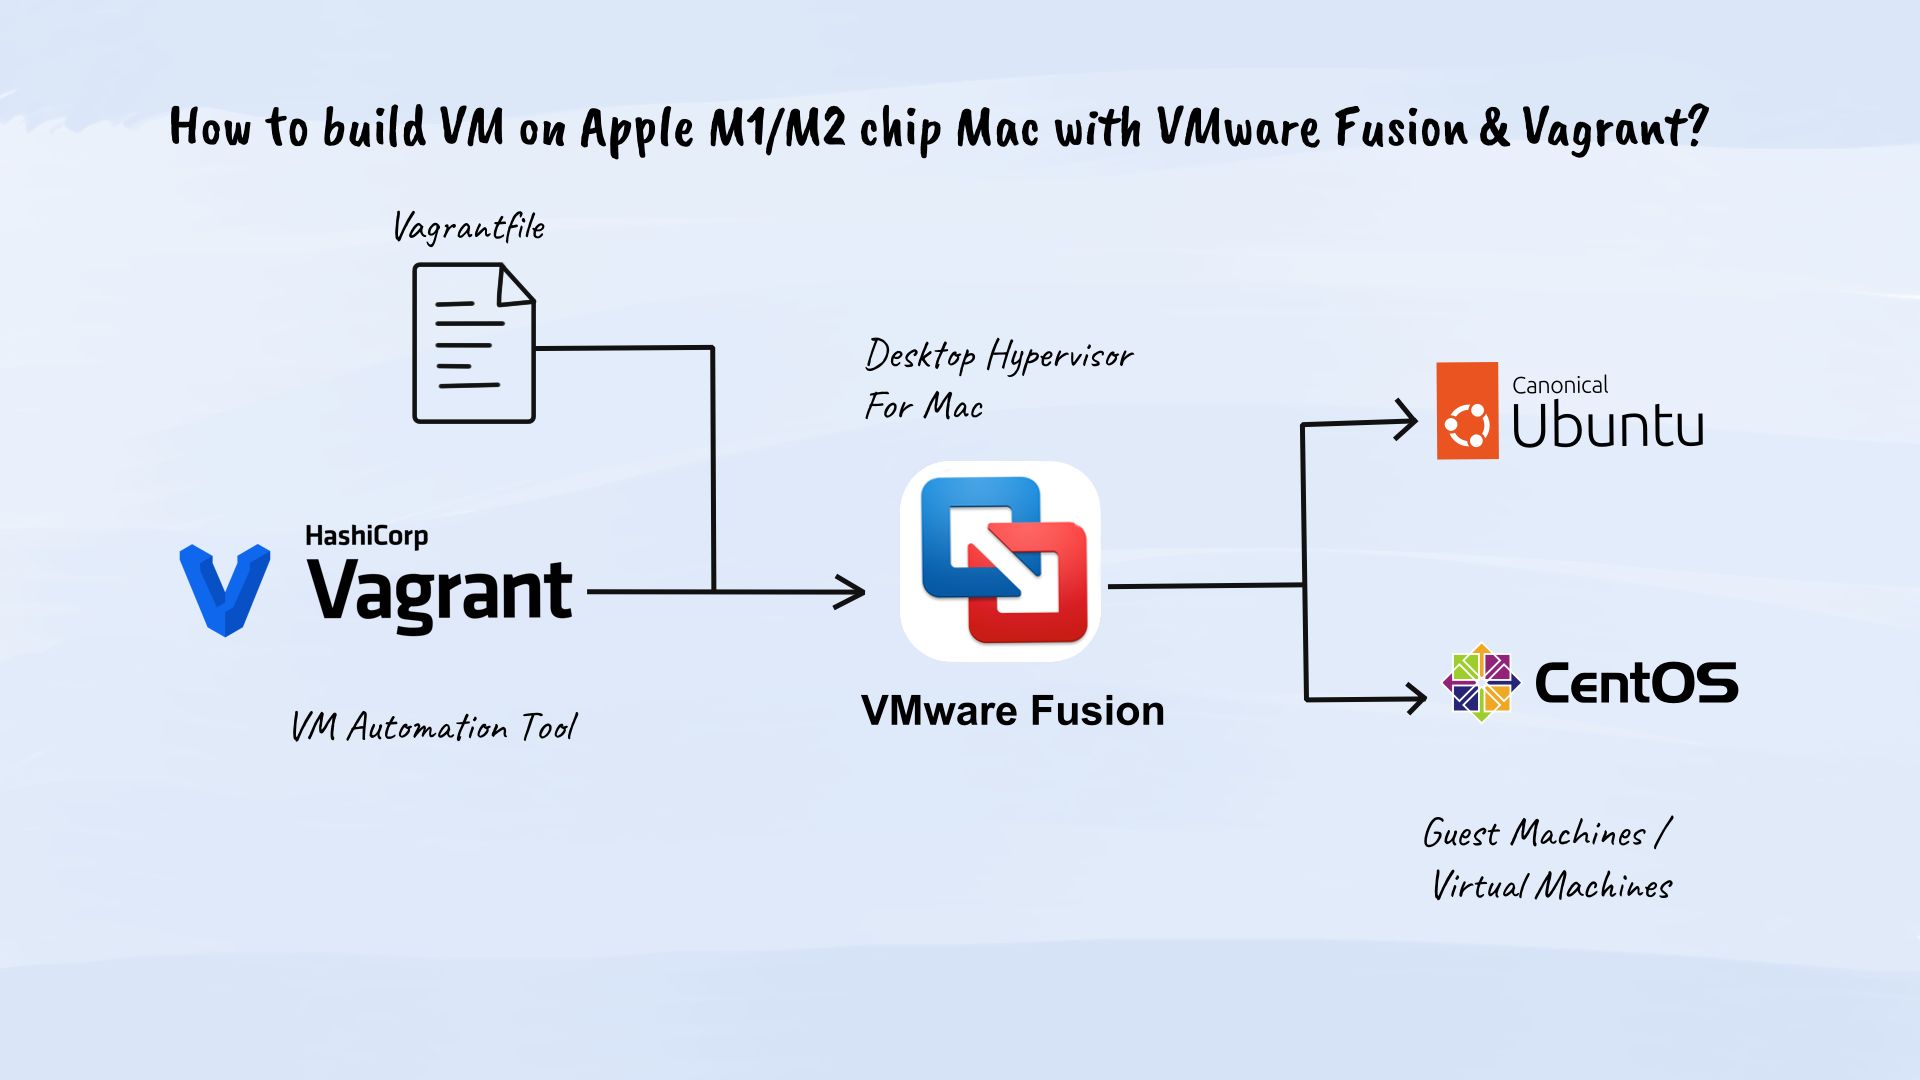 The image illustrates the sequence of steps involved in building a VM using Vagrant with VMware Fusion.